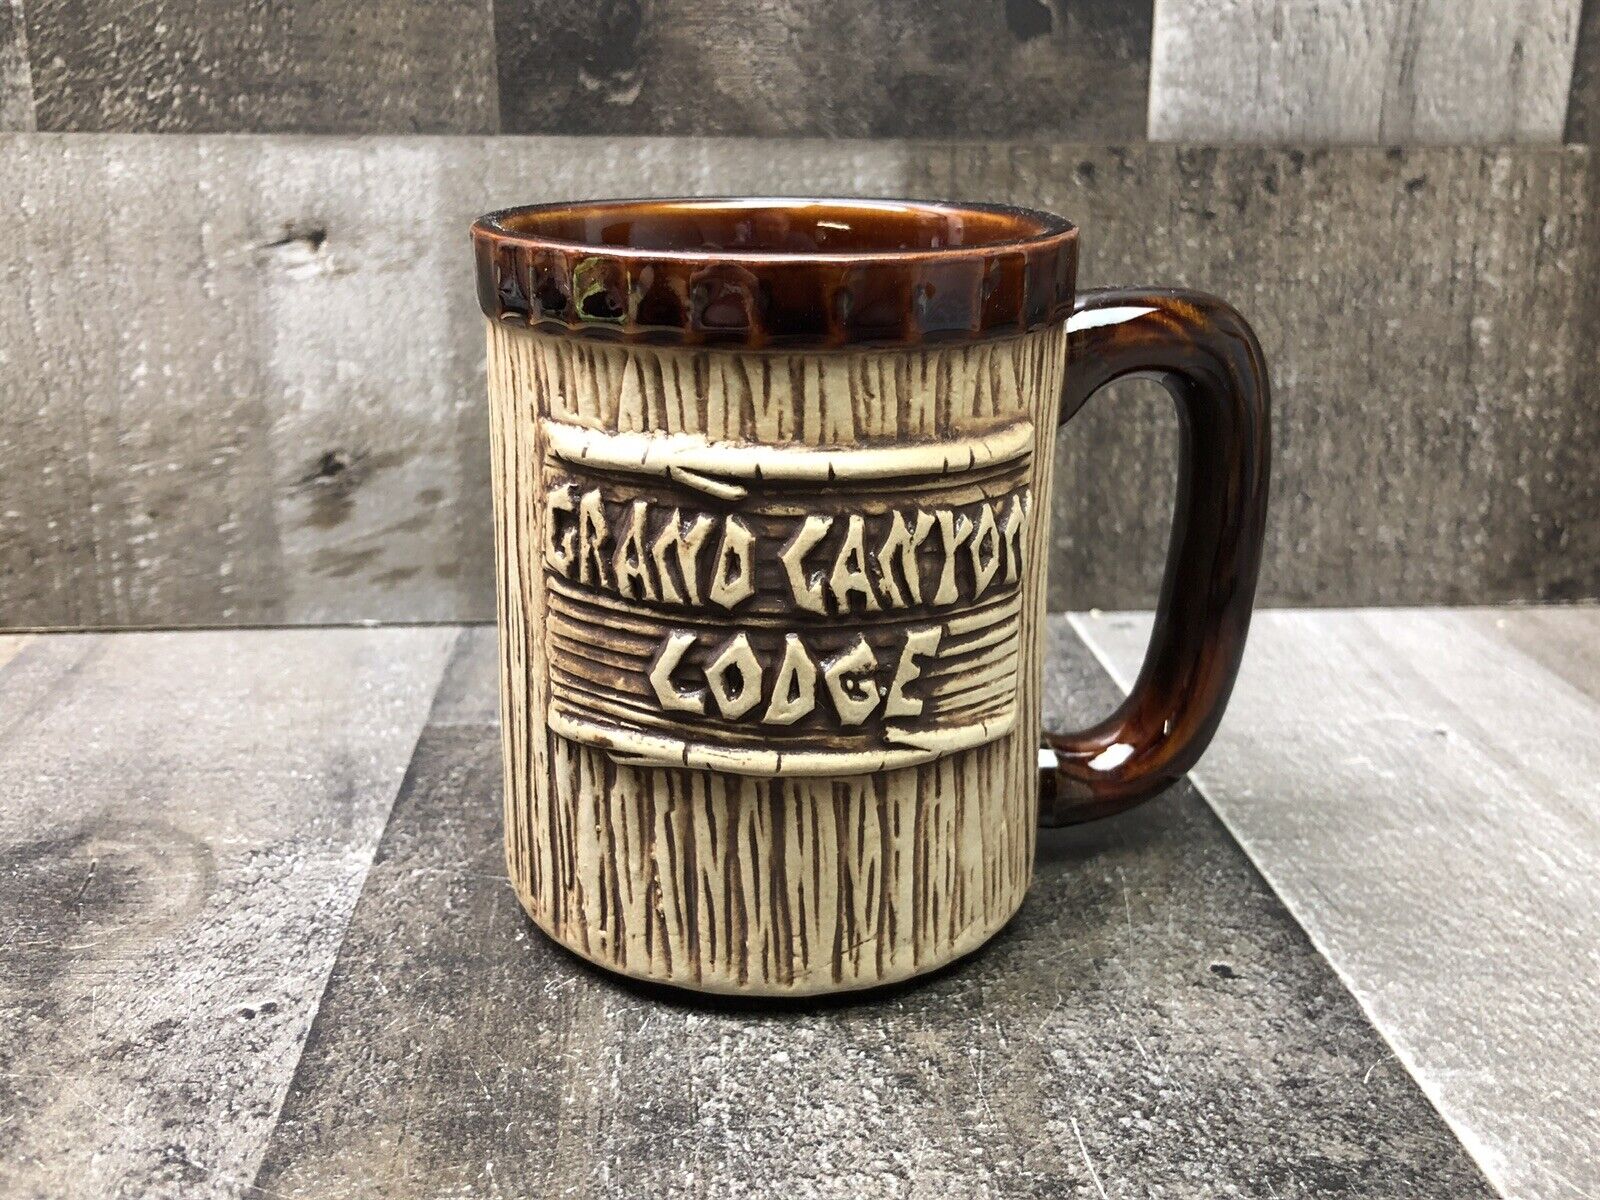 Rustic Grand Canyon Lodge North Rim Coffee Mug Wooden Look EXCELLENT CONDITION